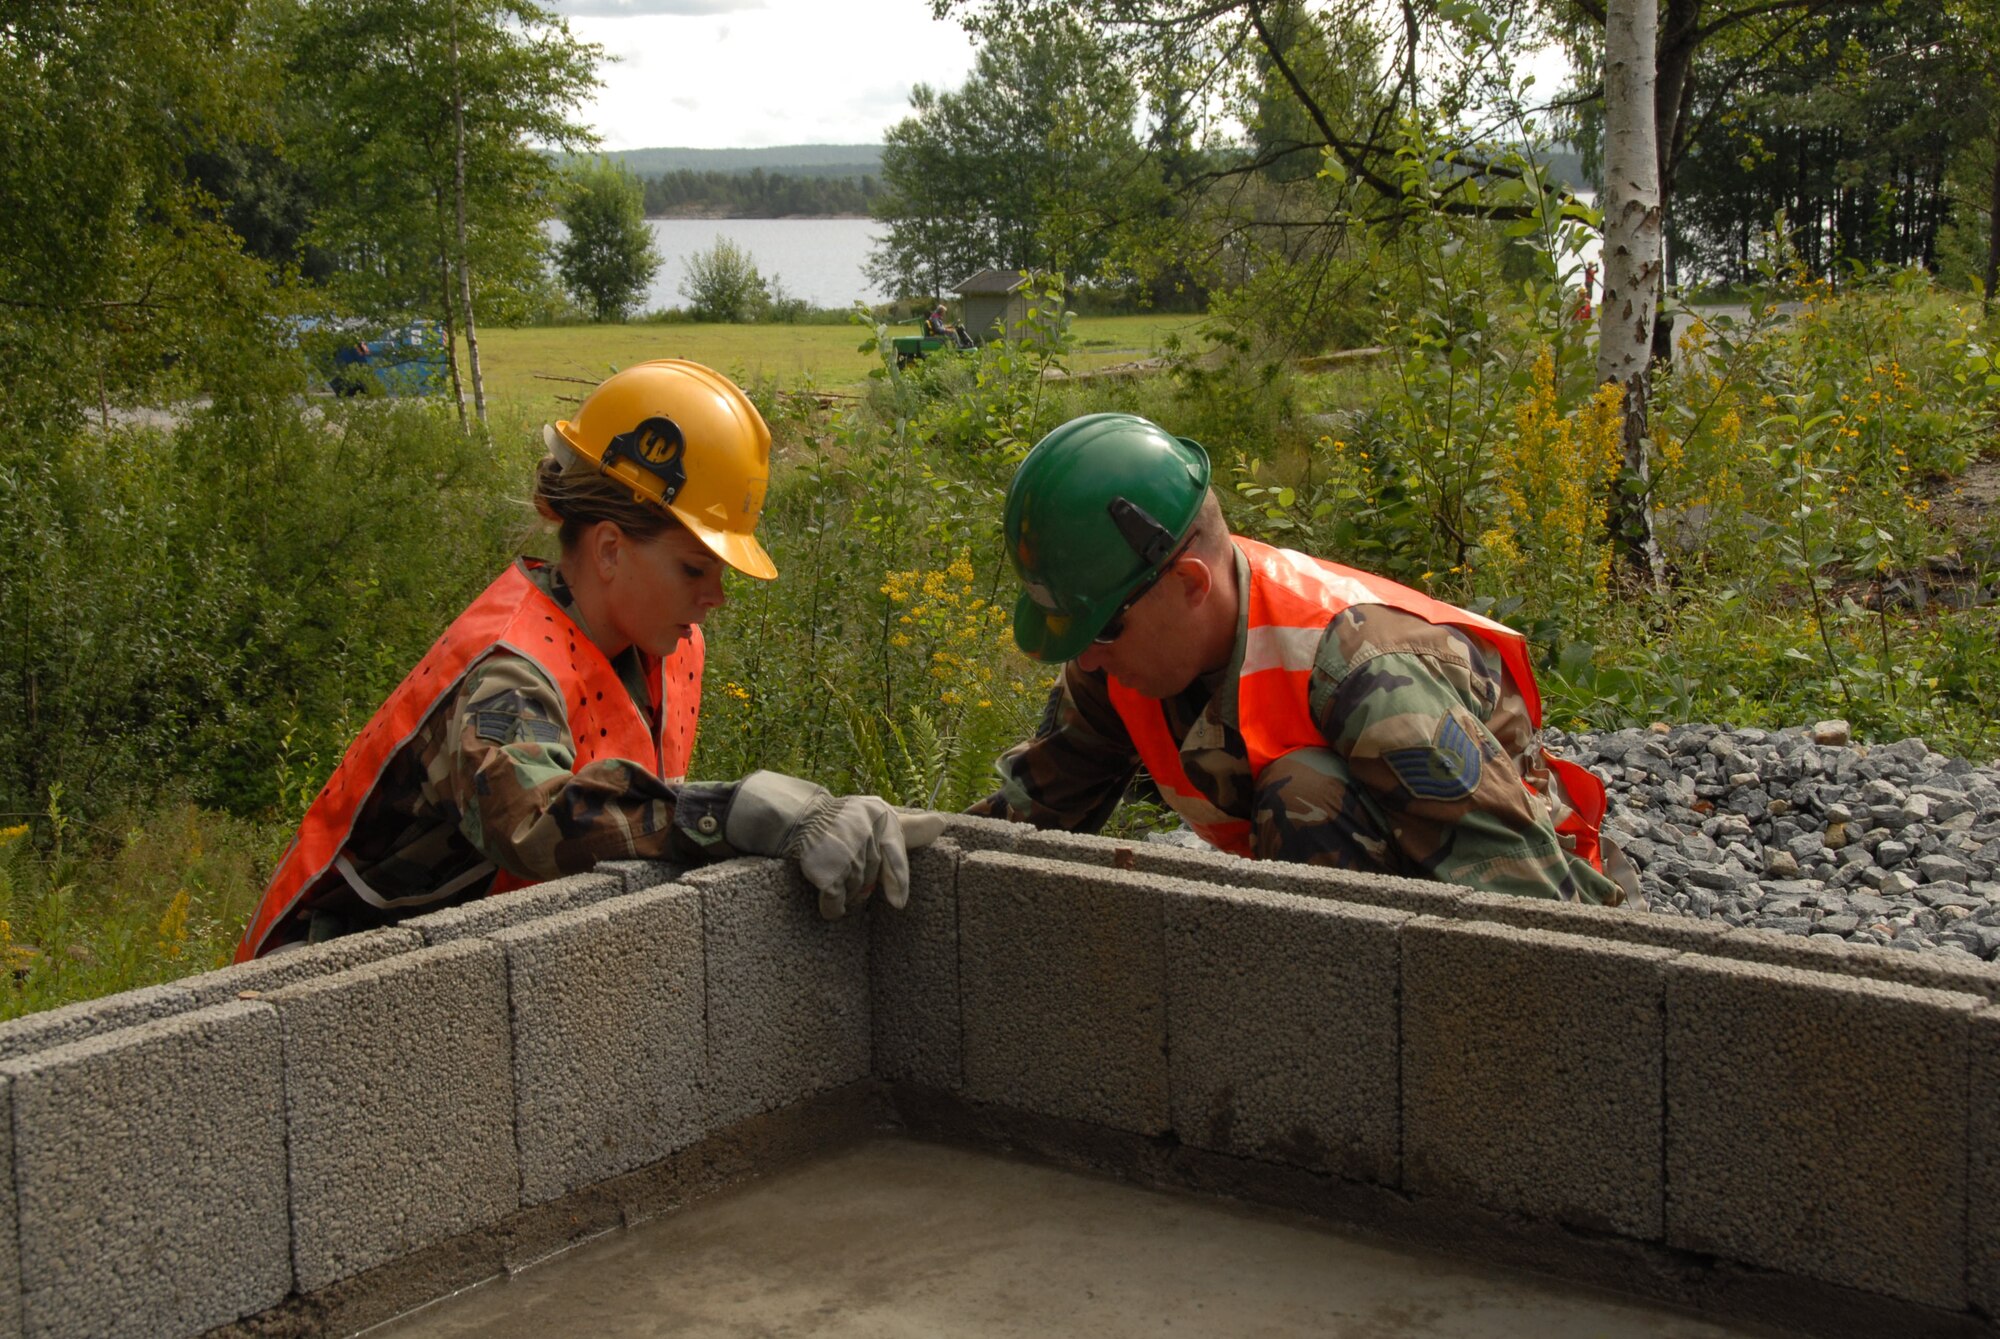 August 11, 2008 Rygge, Air Force Base, Norway-

SrA Abby Drefke and TSgt. Jeffrey Styles prepare the foundation of a new garage wall that will be part of the military dog training compound.  Members of the Iowa Air National Guard, 185th Air Refueling Wing (ARW), Civil Engineering (CE) in Sioux City, Iowa, deployed for training to Rygge Air Force Base, Norway, in support of Operation Impeccable Glove 2008. The engineering joint training mission is a humanitarian mission with the Norwegian Air force and Army Cadets, from the Norwegian Military Academy. 

Official Air Force Photo By: SSgt. Oscar M. Sanchez-Alvarez
